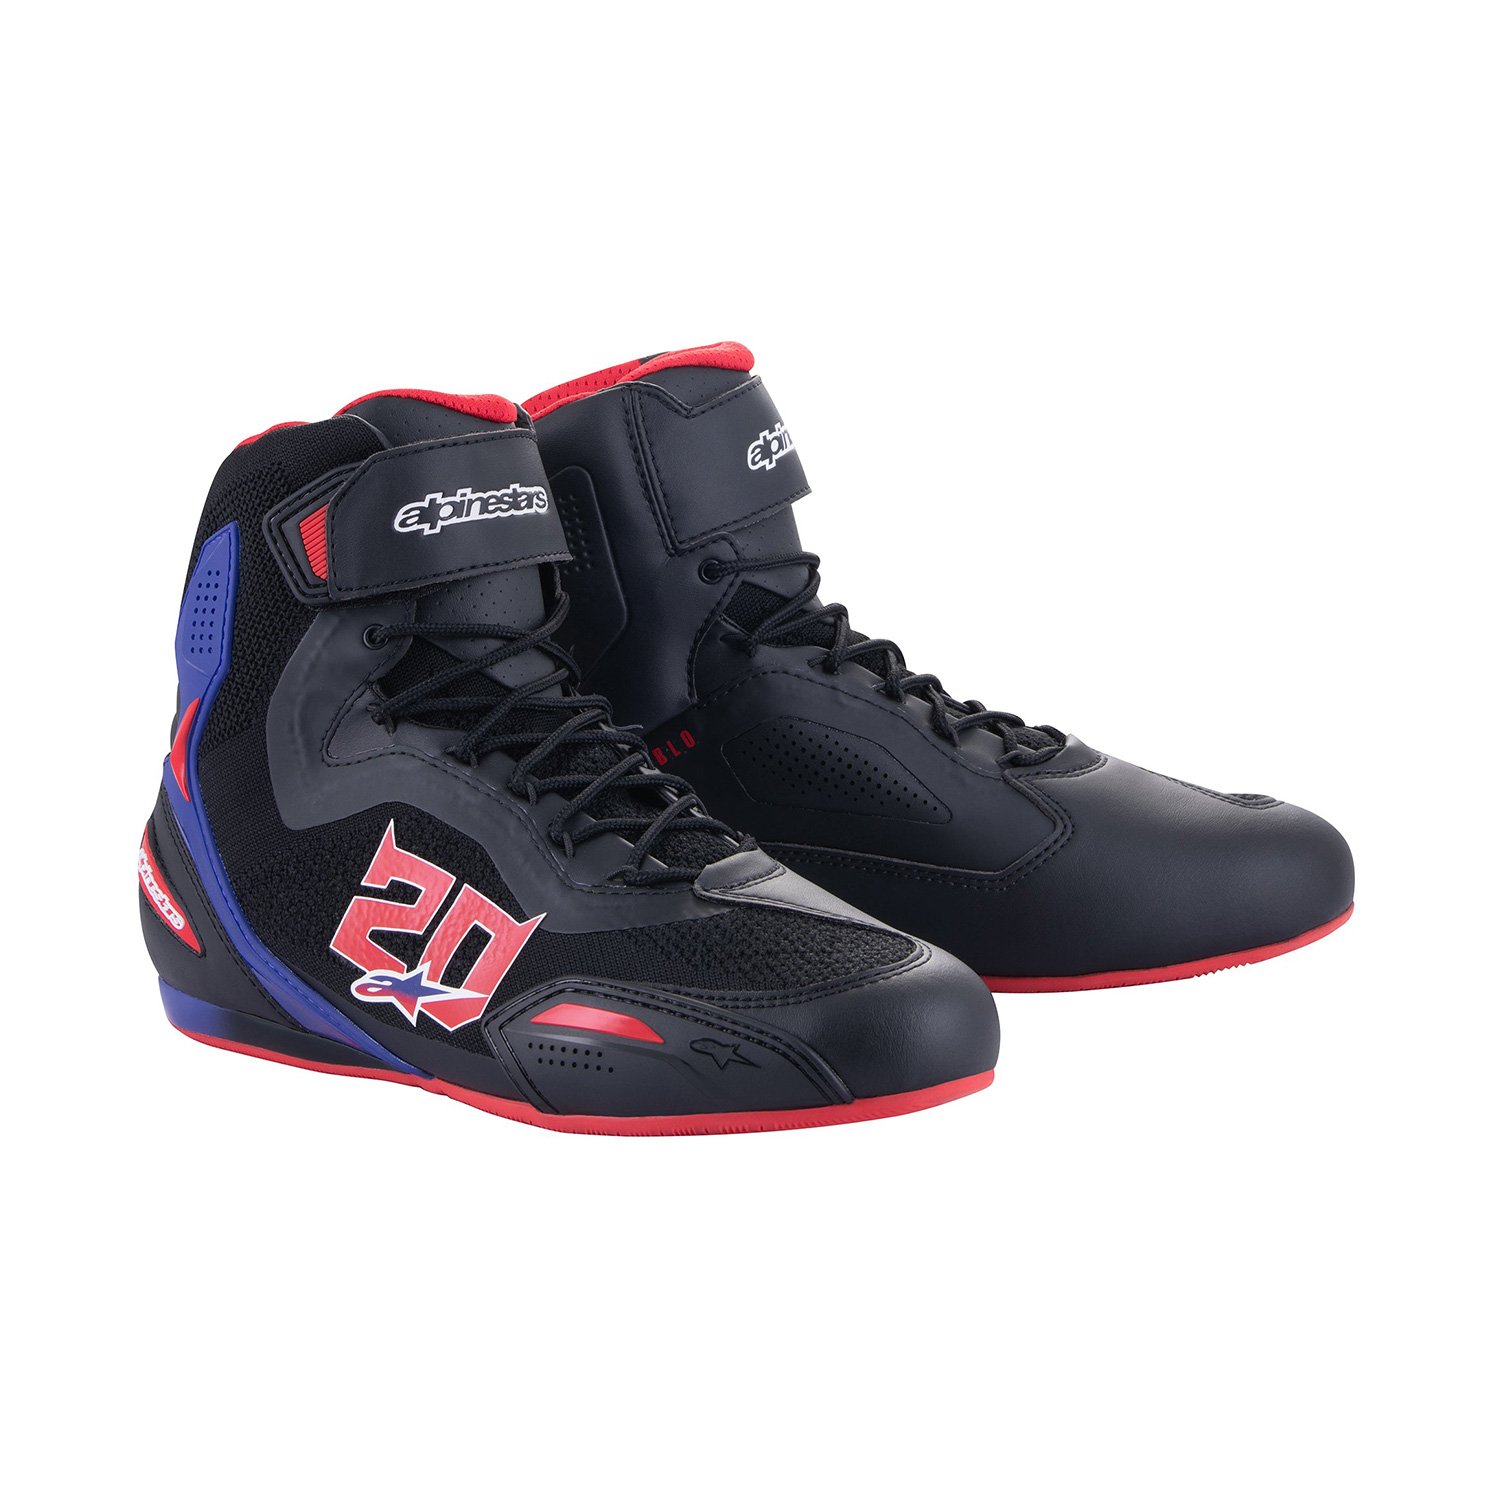 Image of EU Alpinestars FQ20 Faster-3 Rideknit Noir Bright Rouge Bleu Chaussures Taille US 11